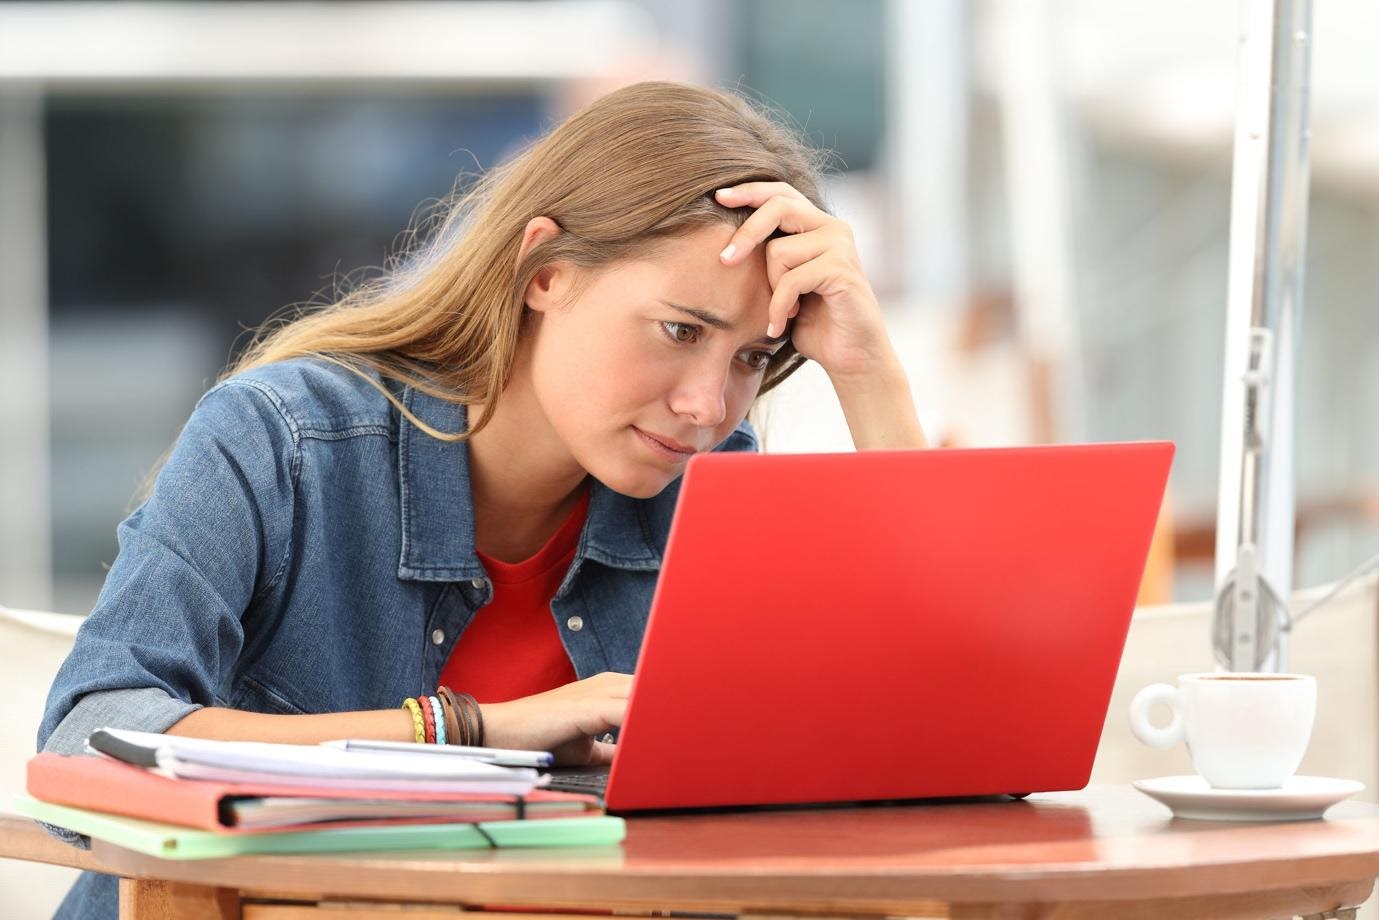 Caring for Mental Health When Studying Online